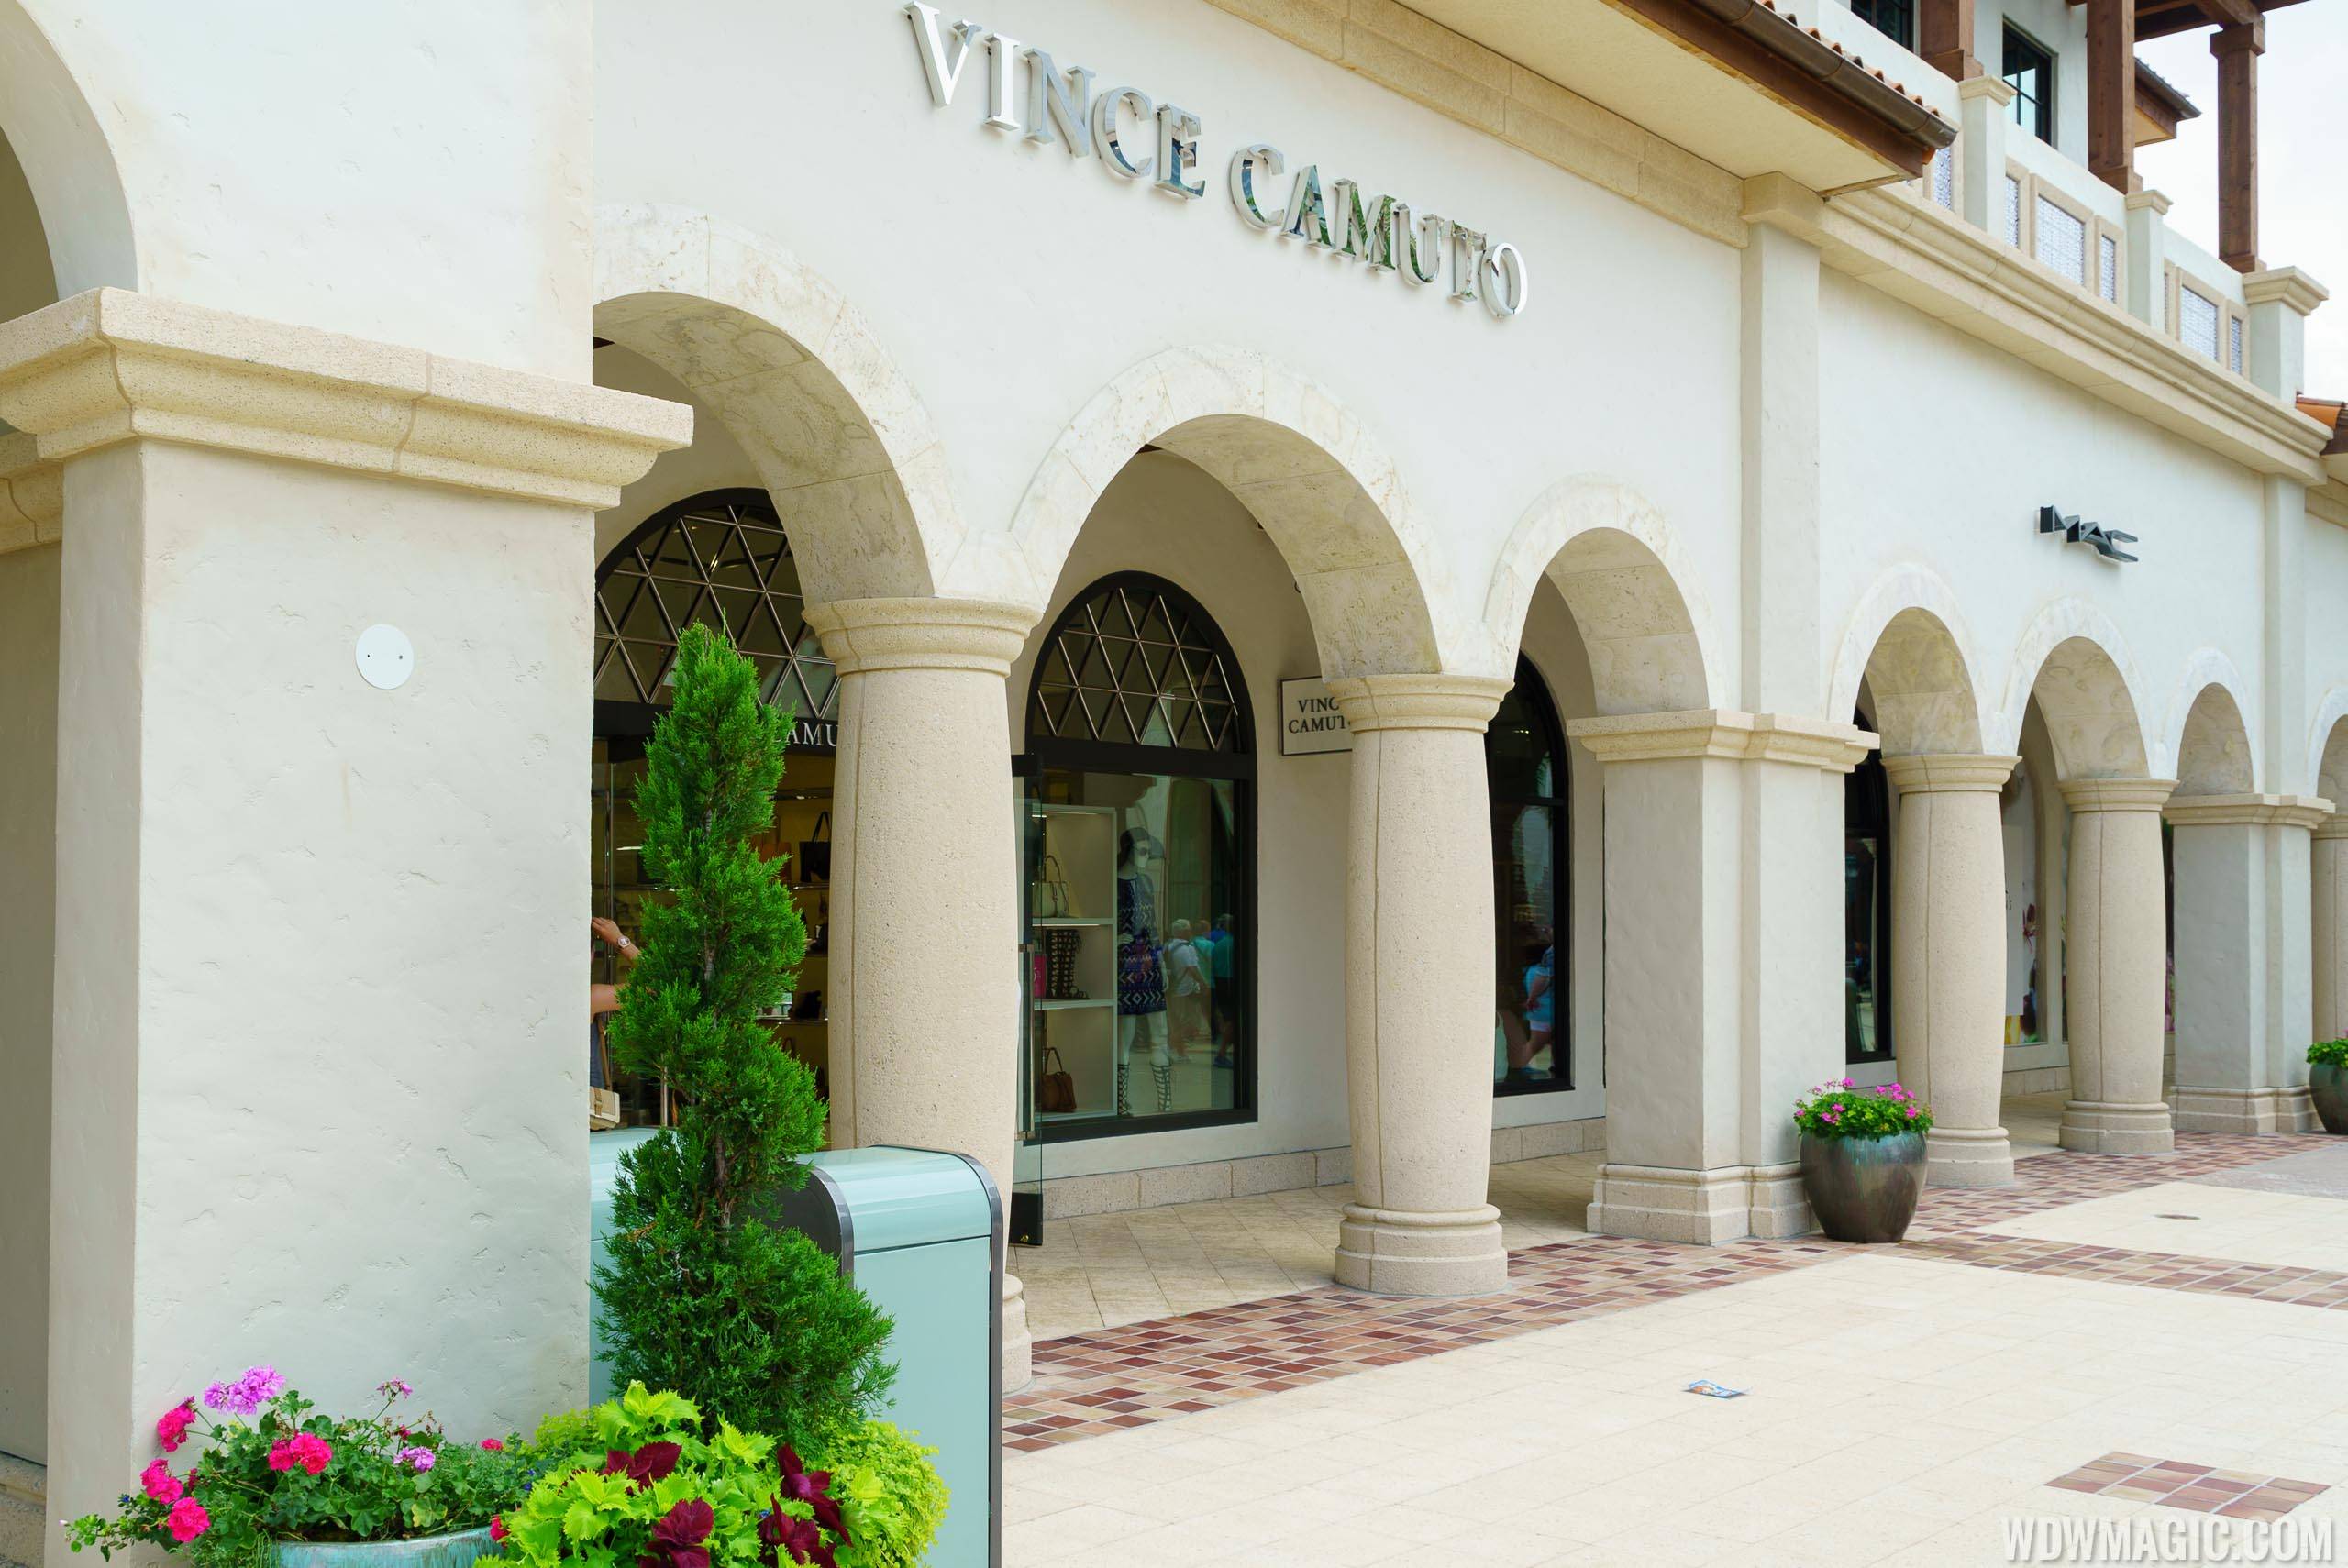 Vince Camuto store front at Disney Springs Town Center